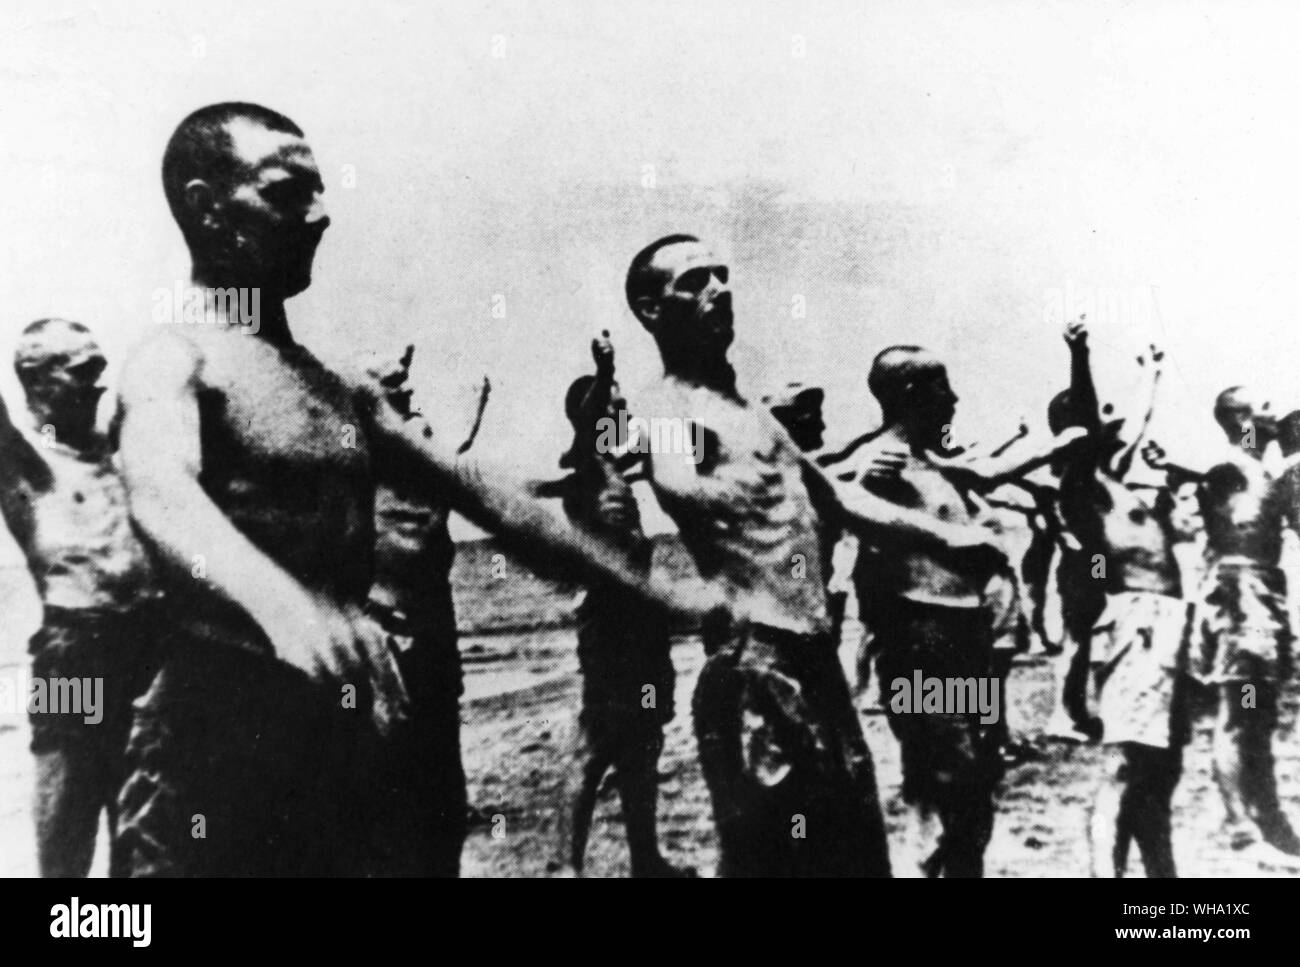 WW2: Dutch prisoners of war in the Dutch East Indies, 1942, surrender to the Japanese. Stock Photo